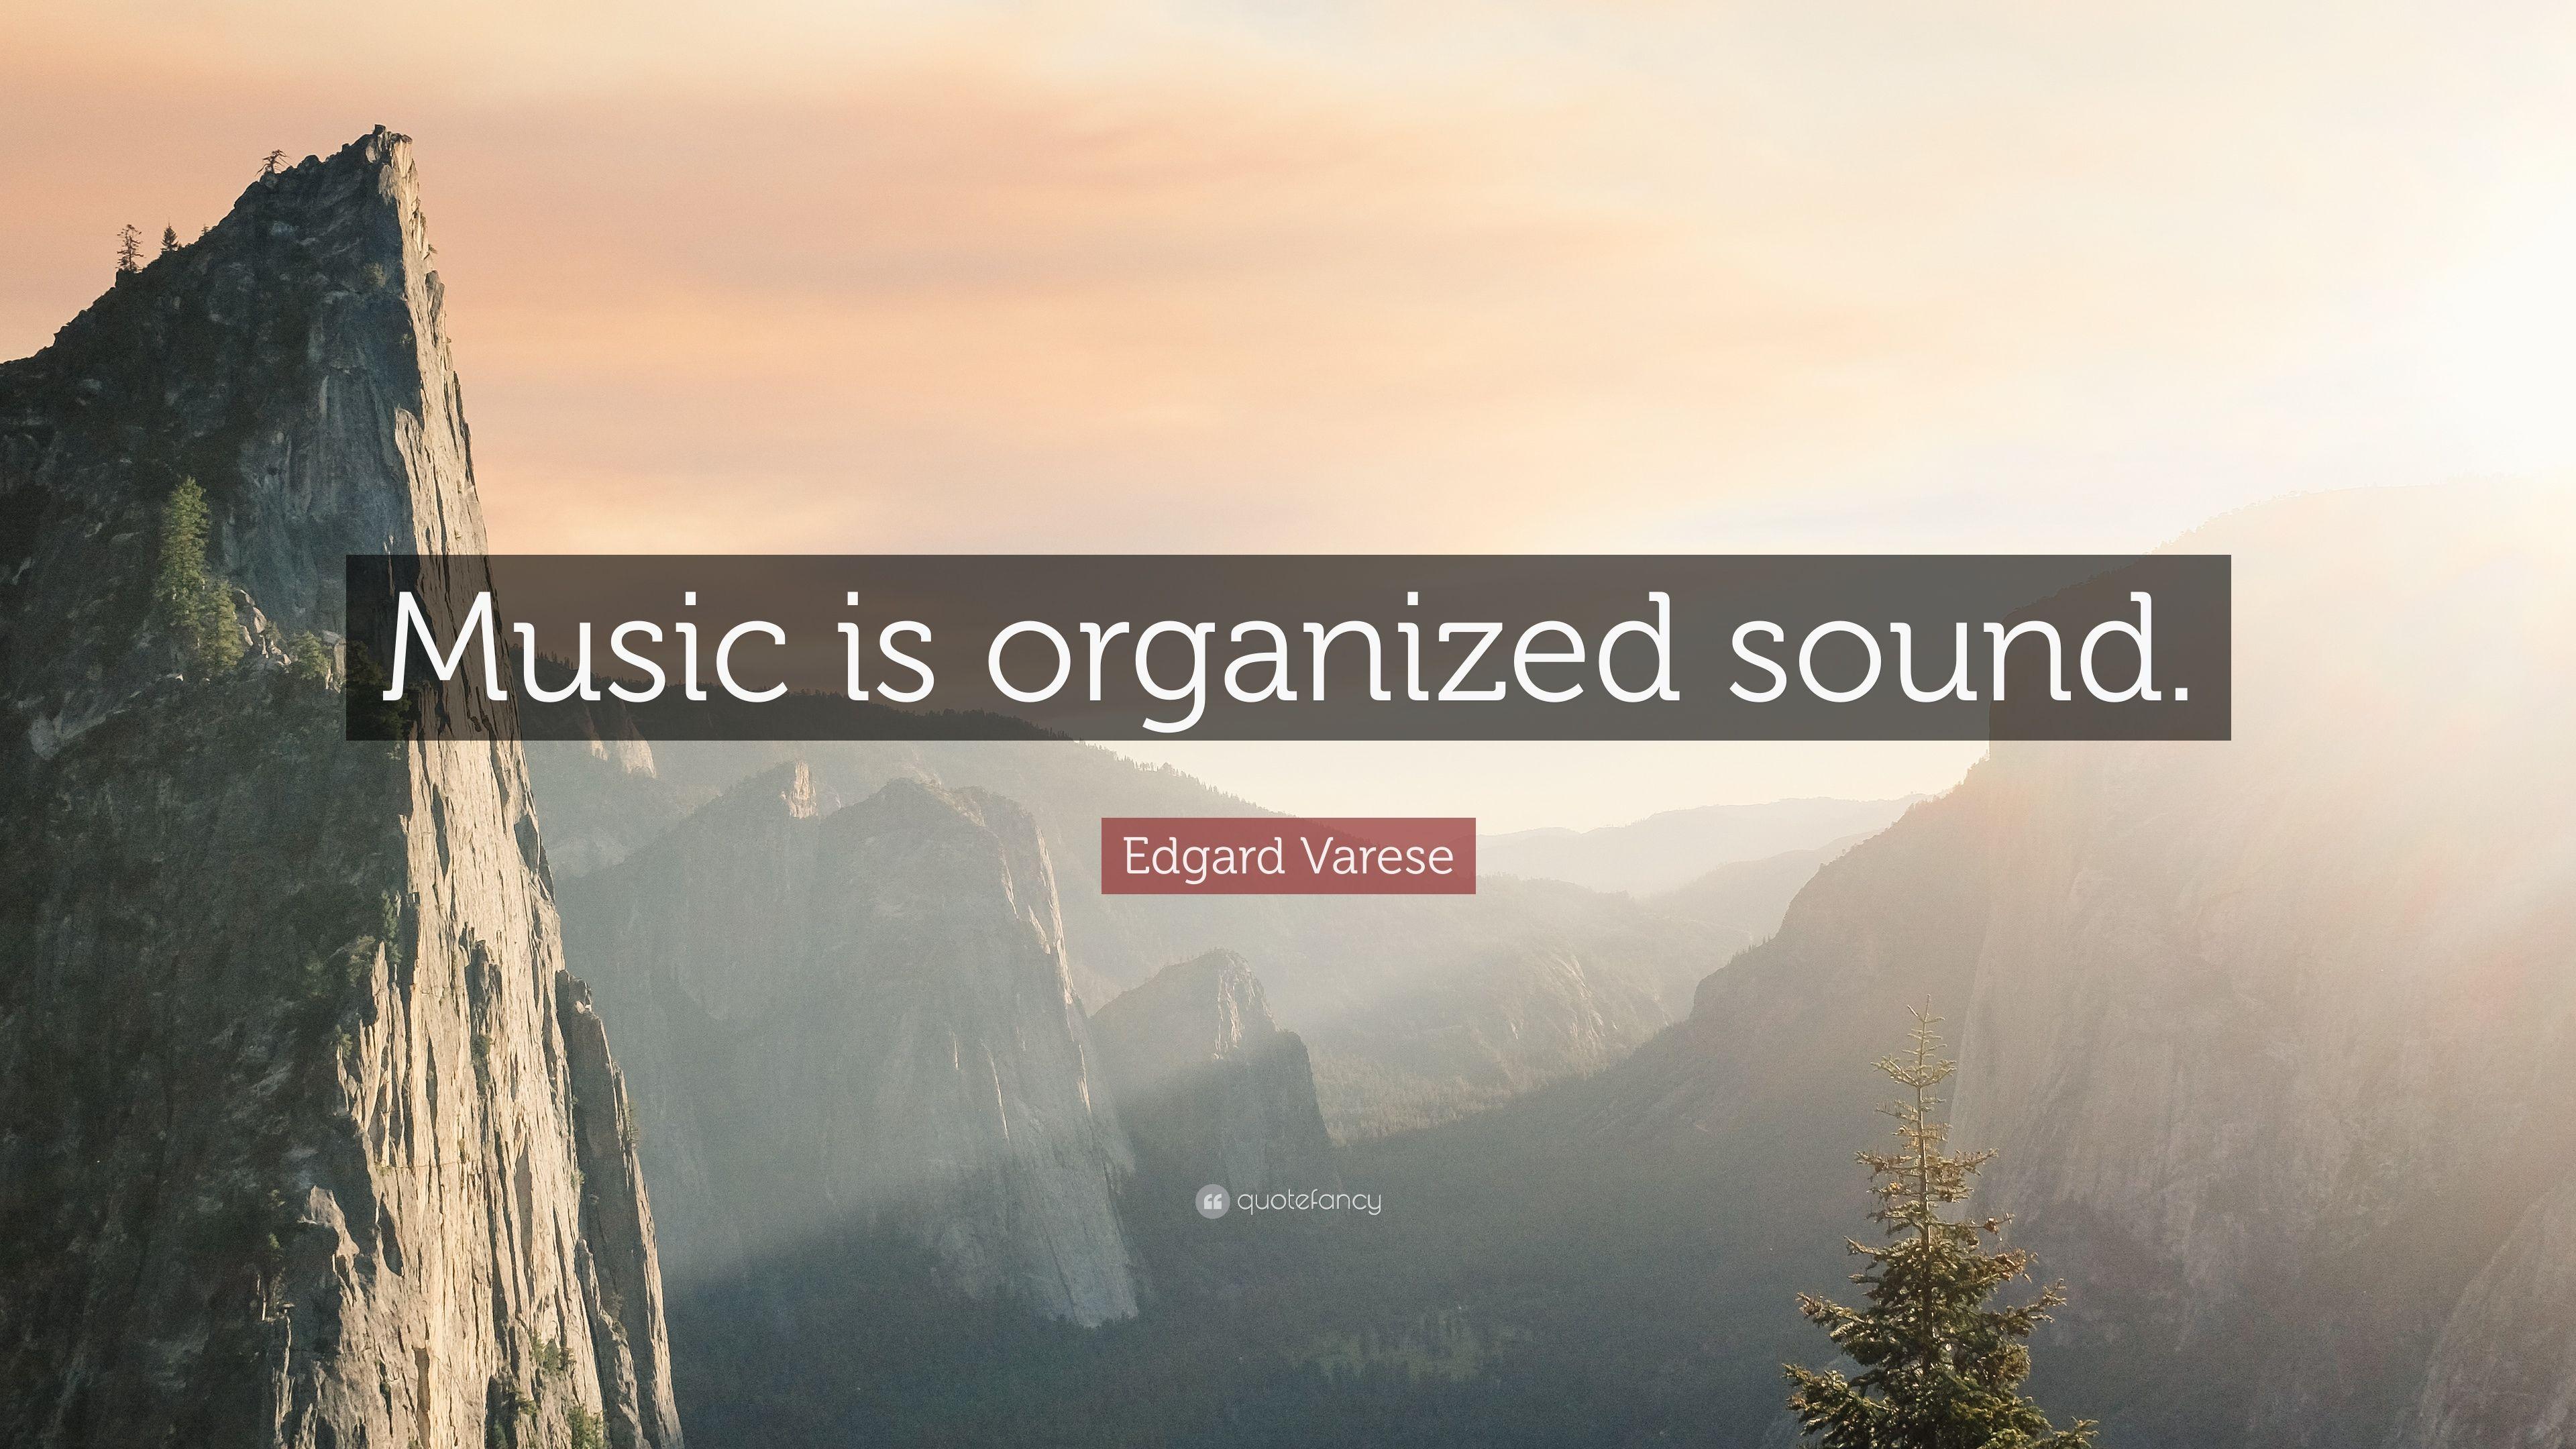 Edgard Varese Quote: “Music is organized sound.”